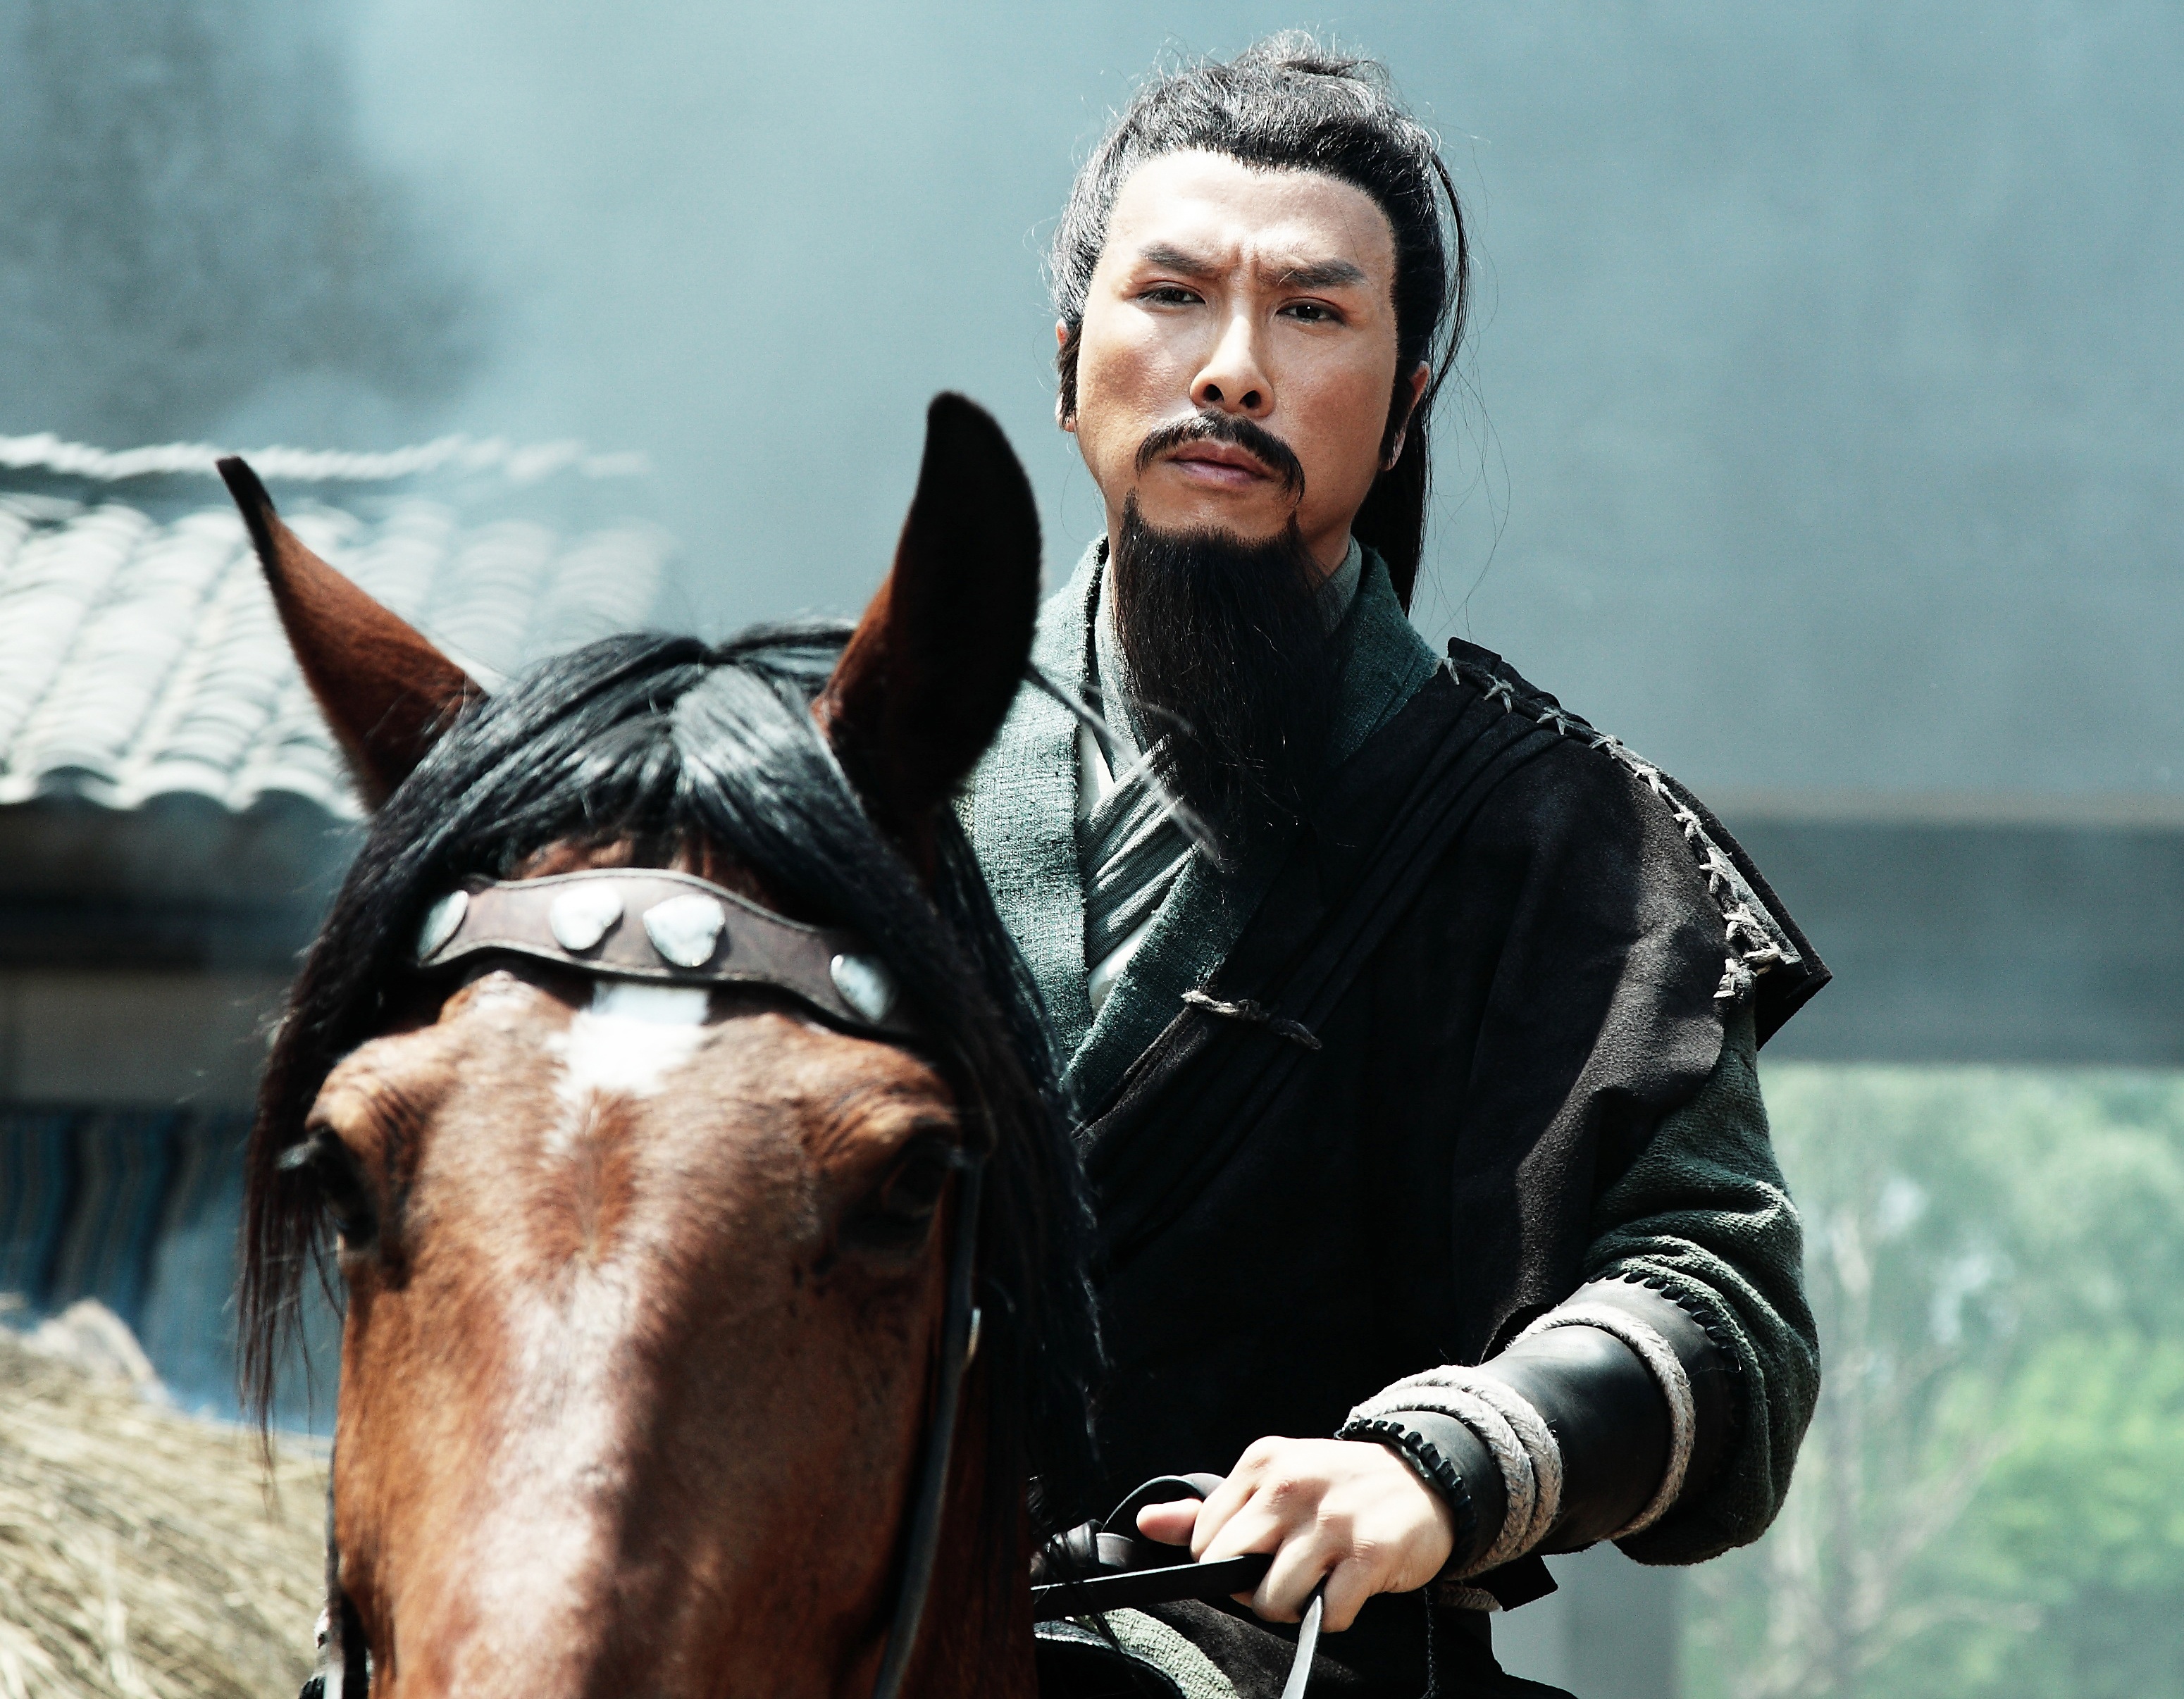 Donnie Yen Breaks Out the Green Dragon Blade! Second Trailer For THE LOST  BLADESMAN